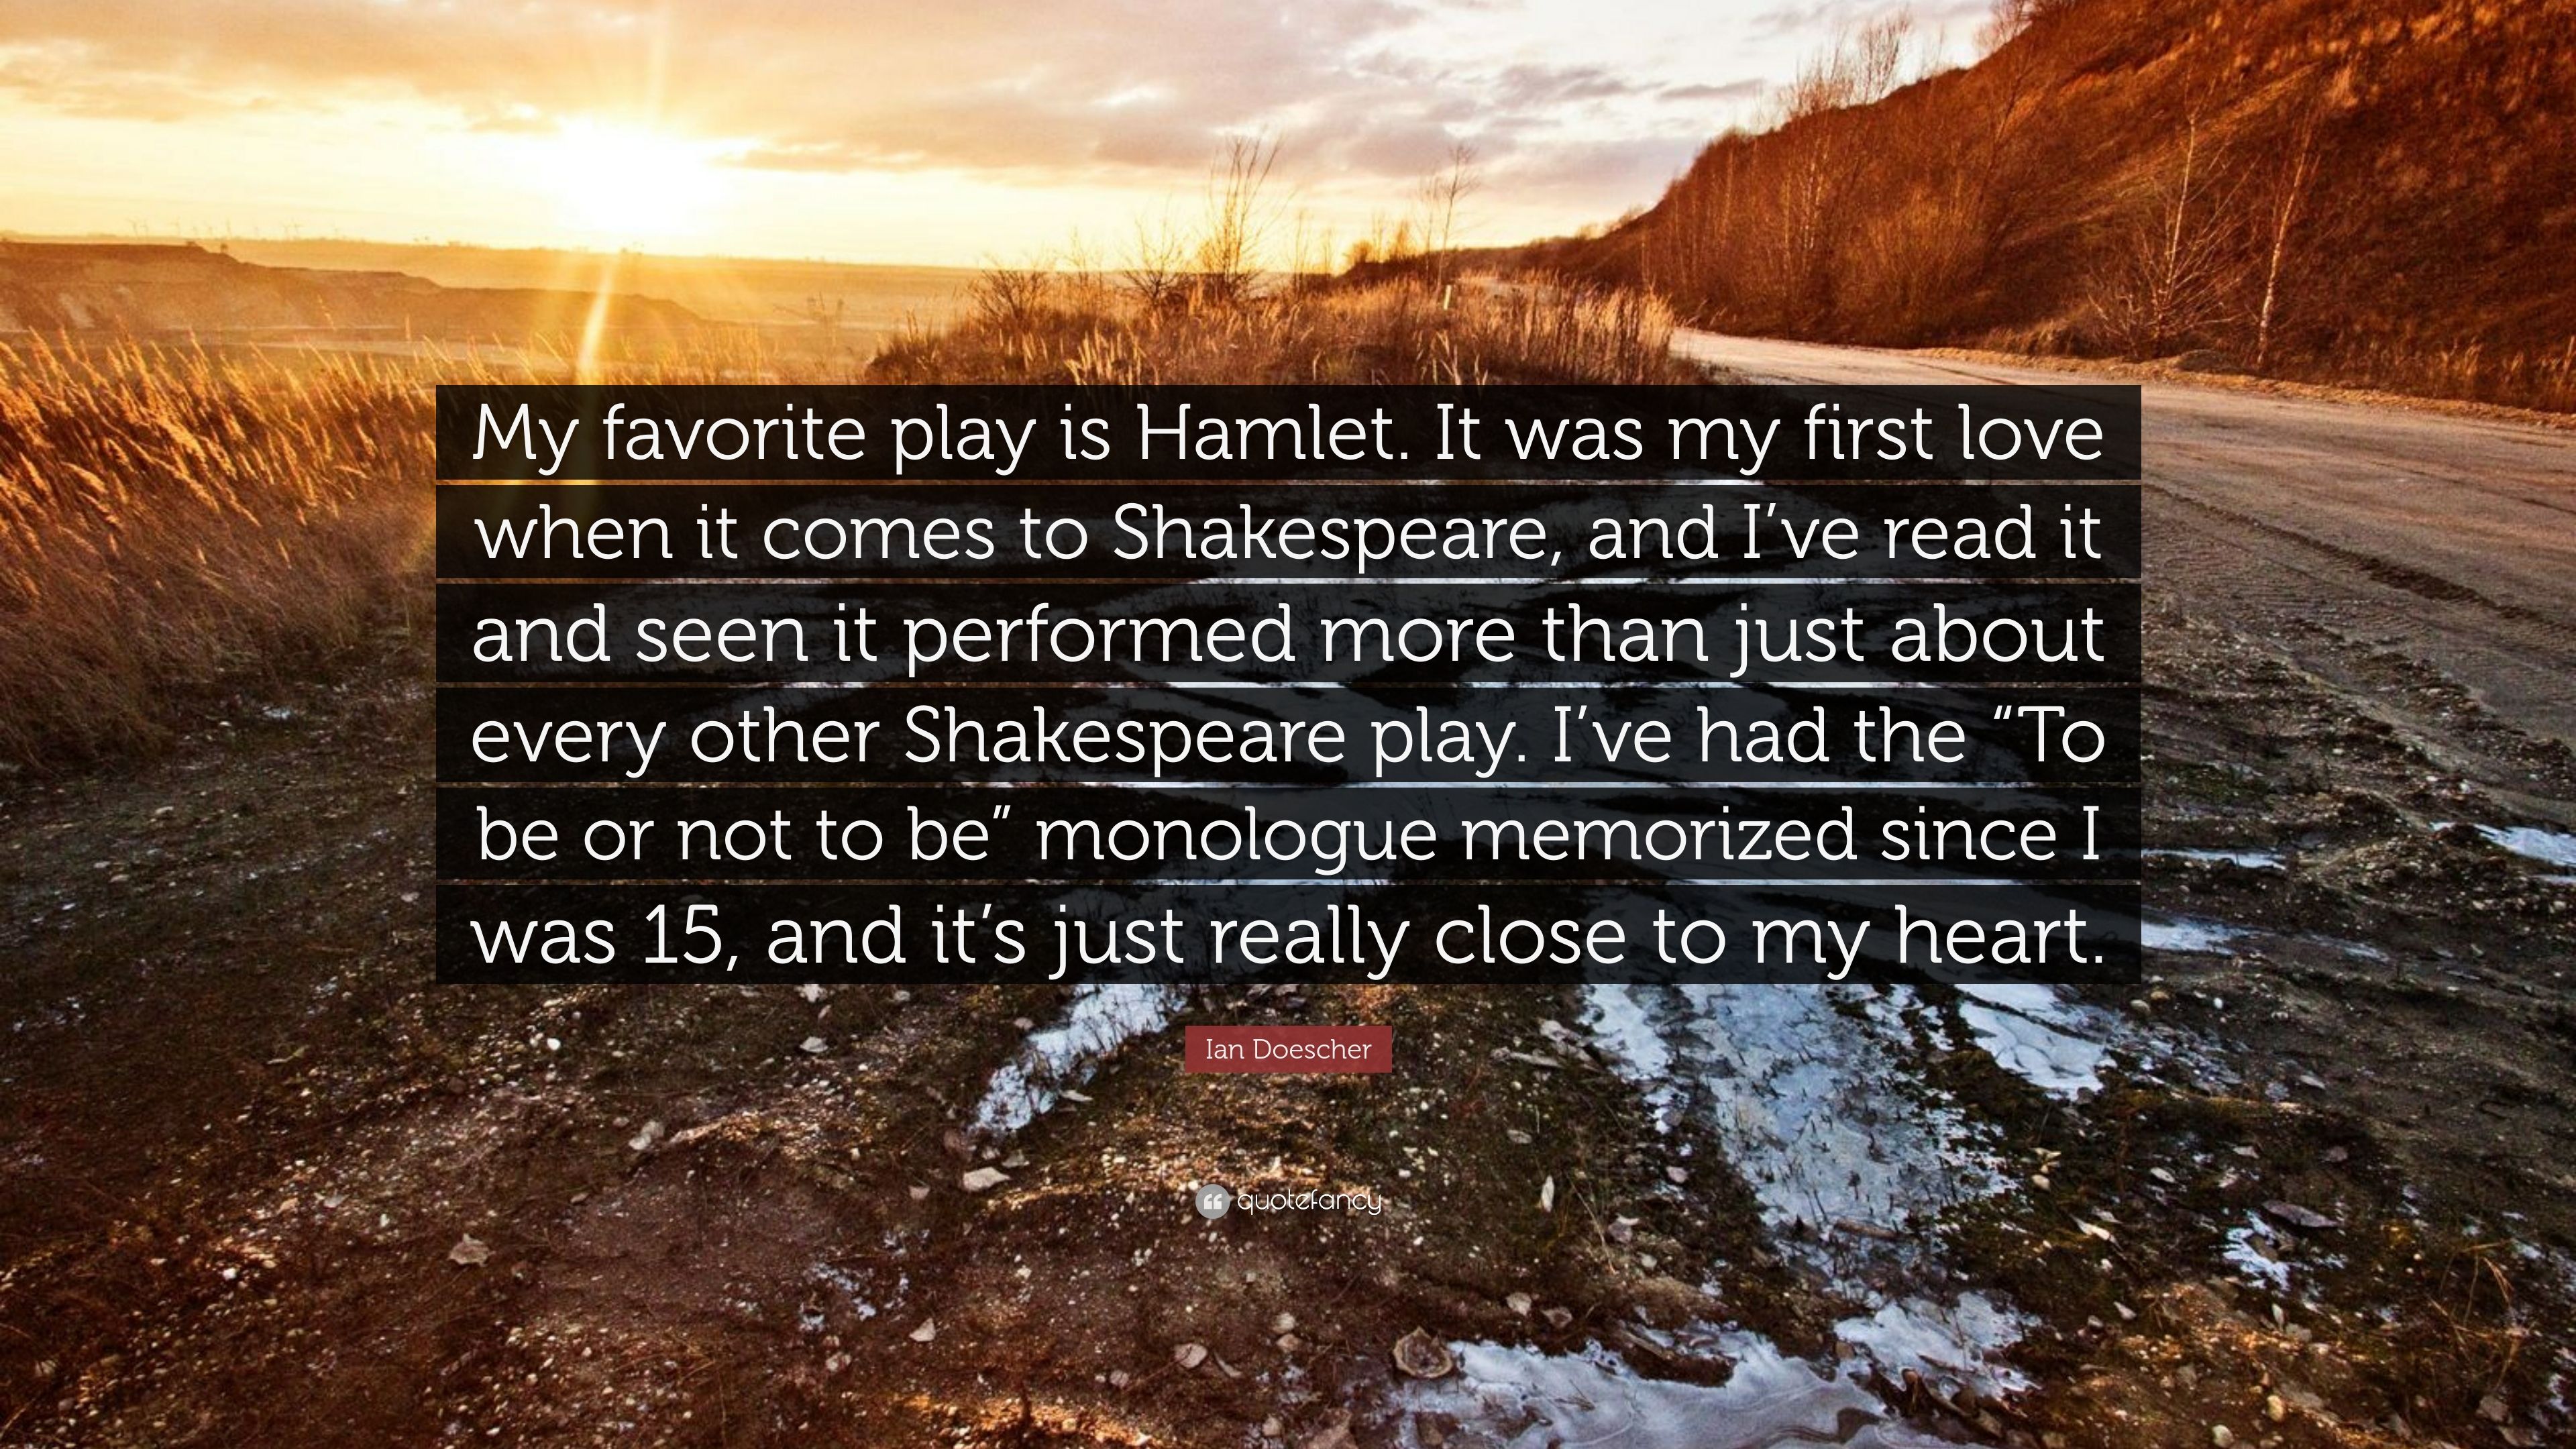 Ian Doescher Quote: “My favorite play is Hamlet. It was my first